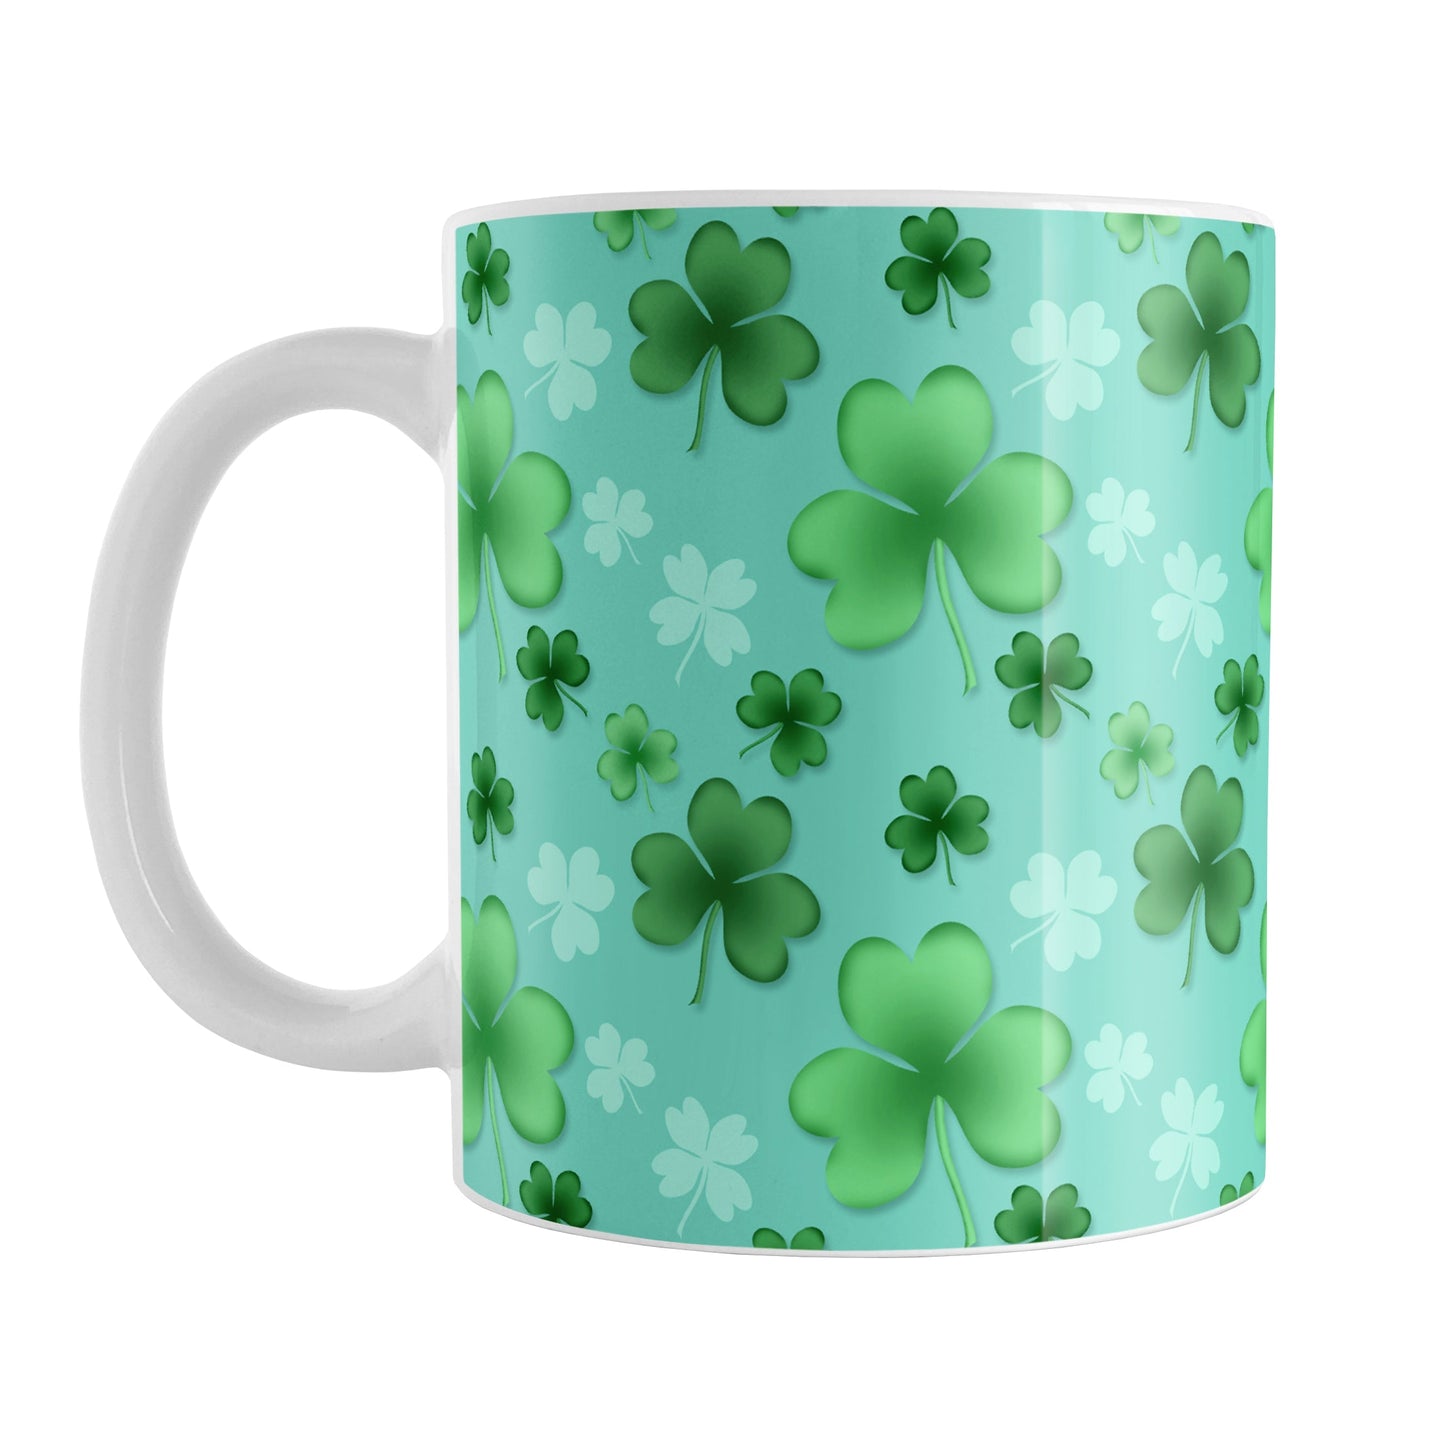 Lucky Clover Pattern Teal and Green Mug (11oz) at Amy's Coffee Mugs. A ceramic coffee mug designed with a lucky green clover pattern with a 4-leaf clover among 3-leaf clovers, in different shades of green, over a teal background that wraps around the mug to the handle.